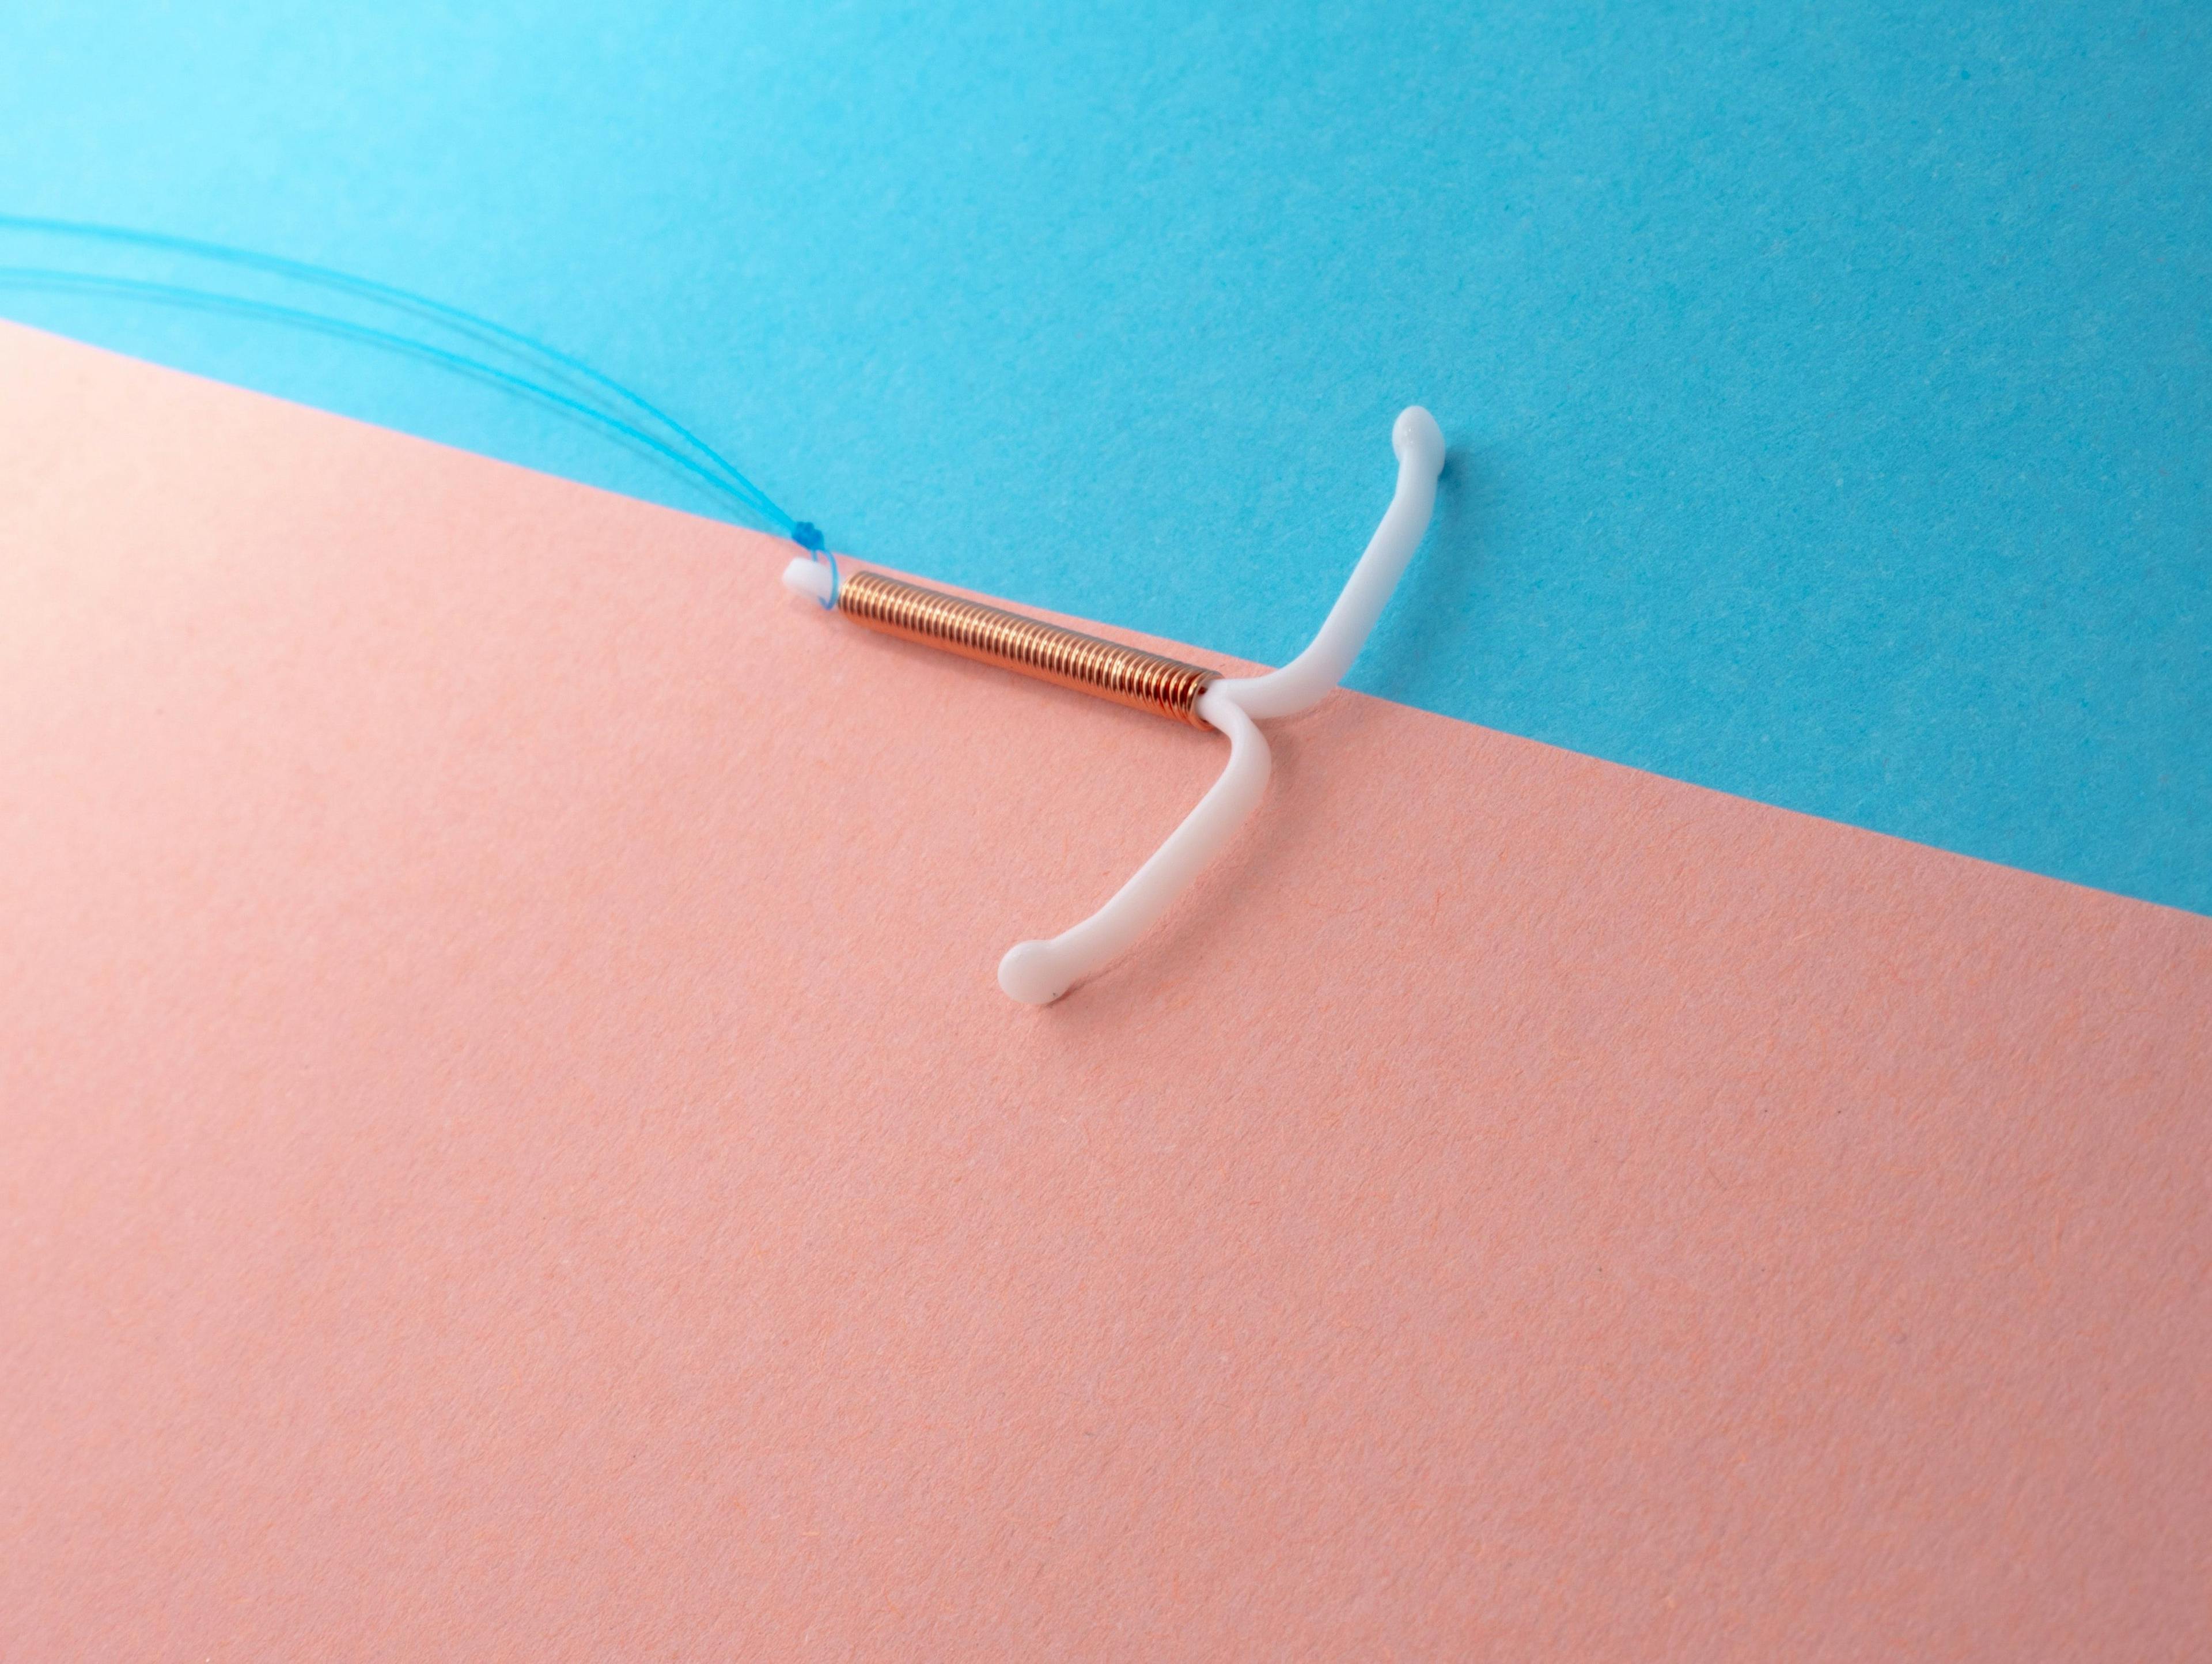 IUDs May Reduce Ovarian Cancer Risk by 30%